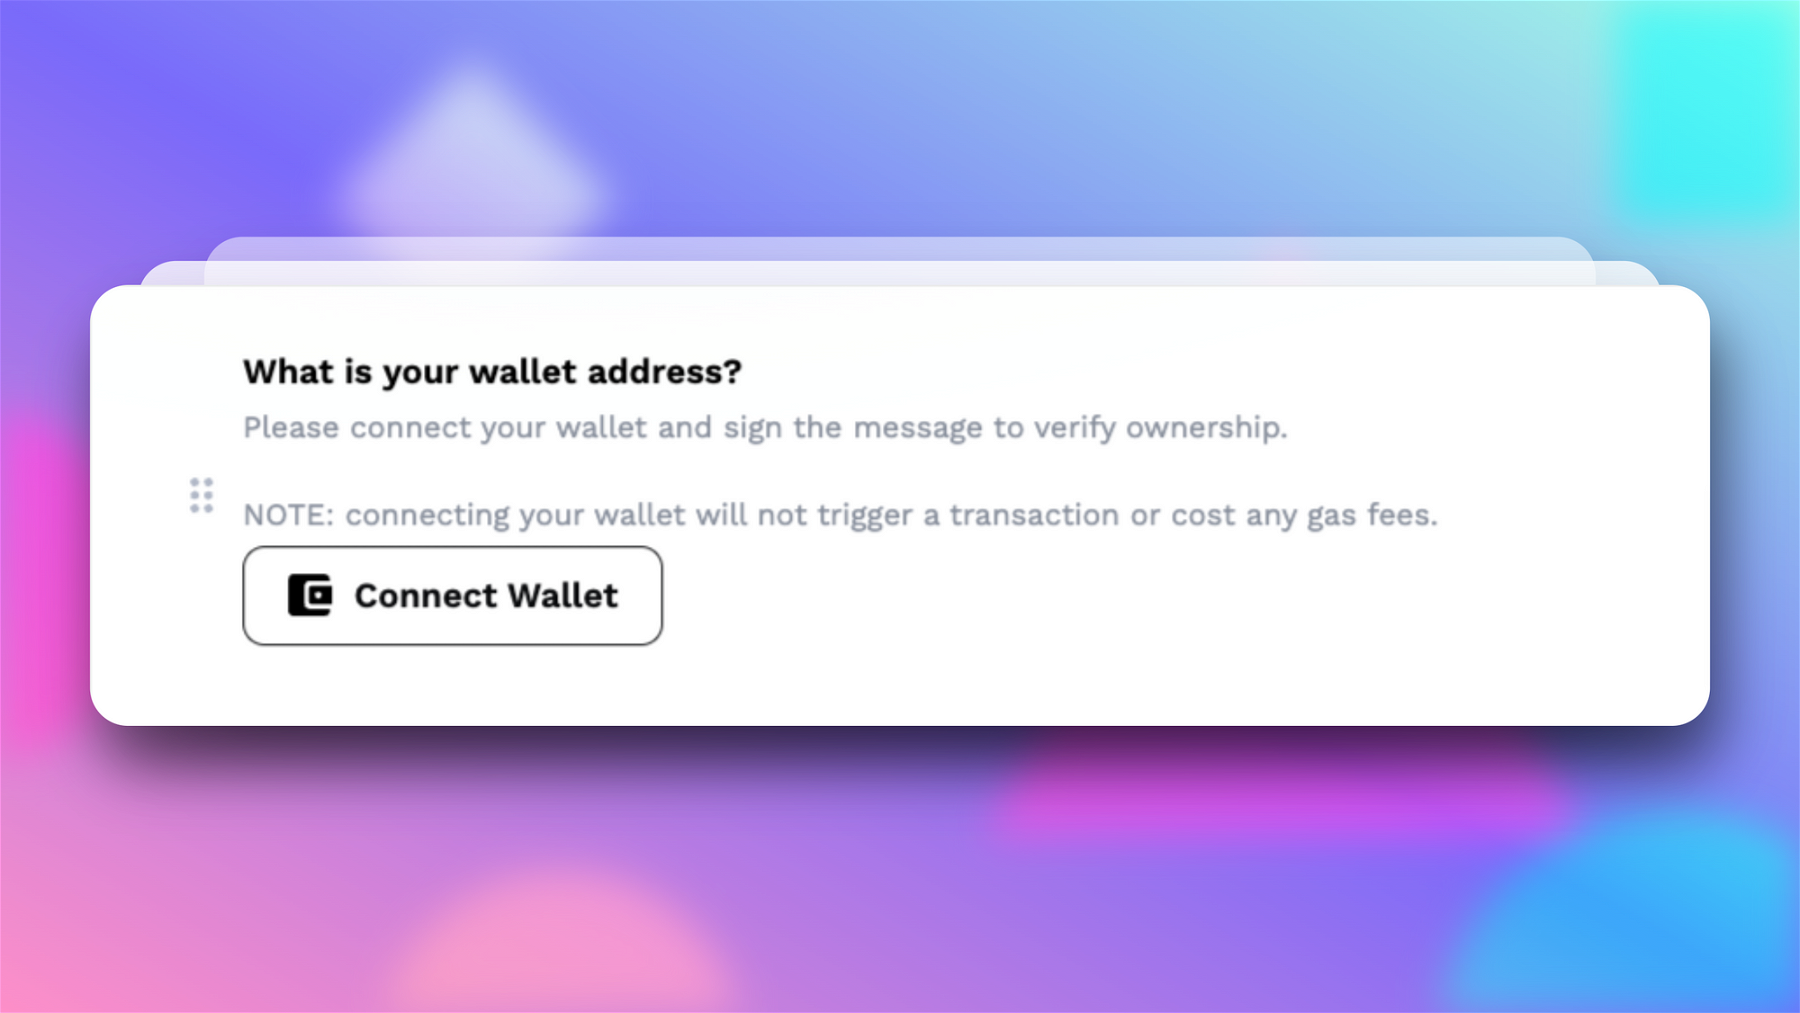 This is how the Wallet Connect option appears on your DeForm in edit mode. You can click the title to customize the question to your liking. It asks, “What is your wallet address?” by default.